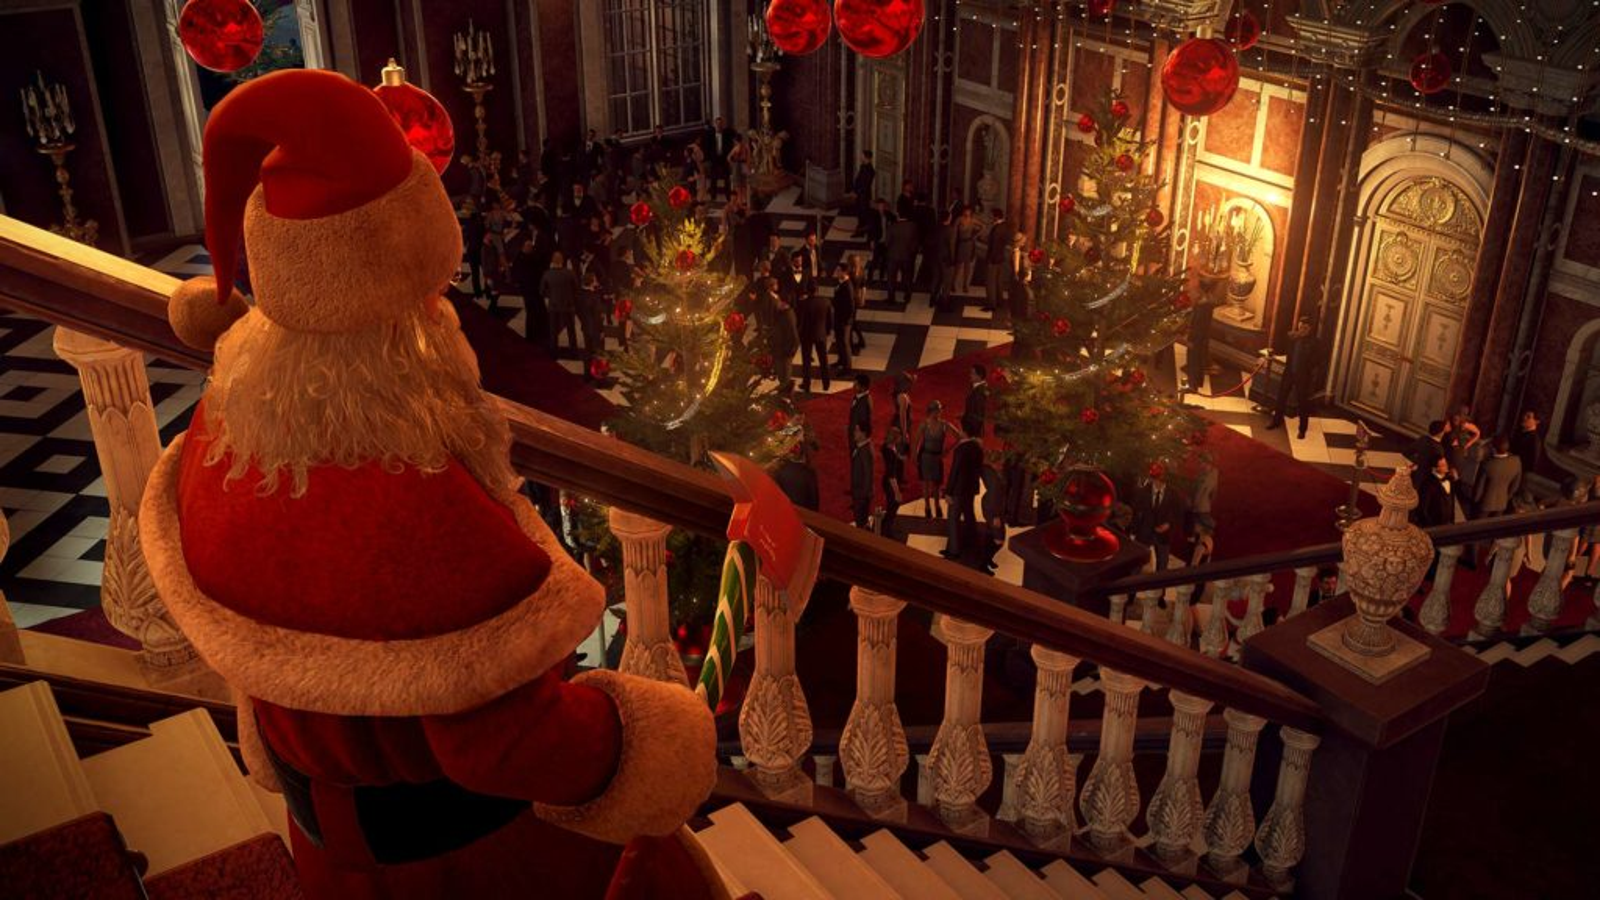 Unconventional Christmas Video Games to Celebrate the Season